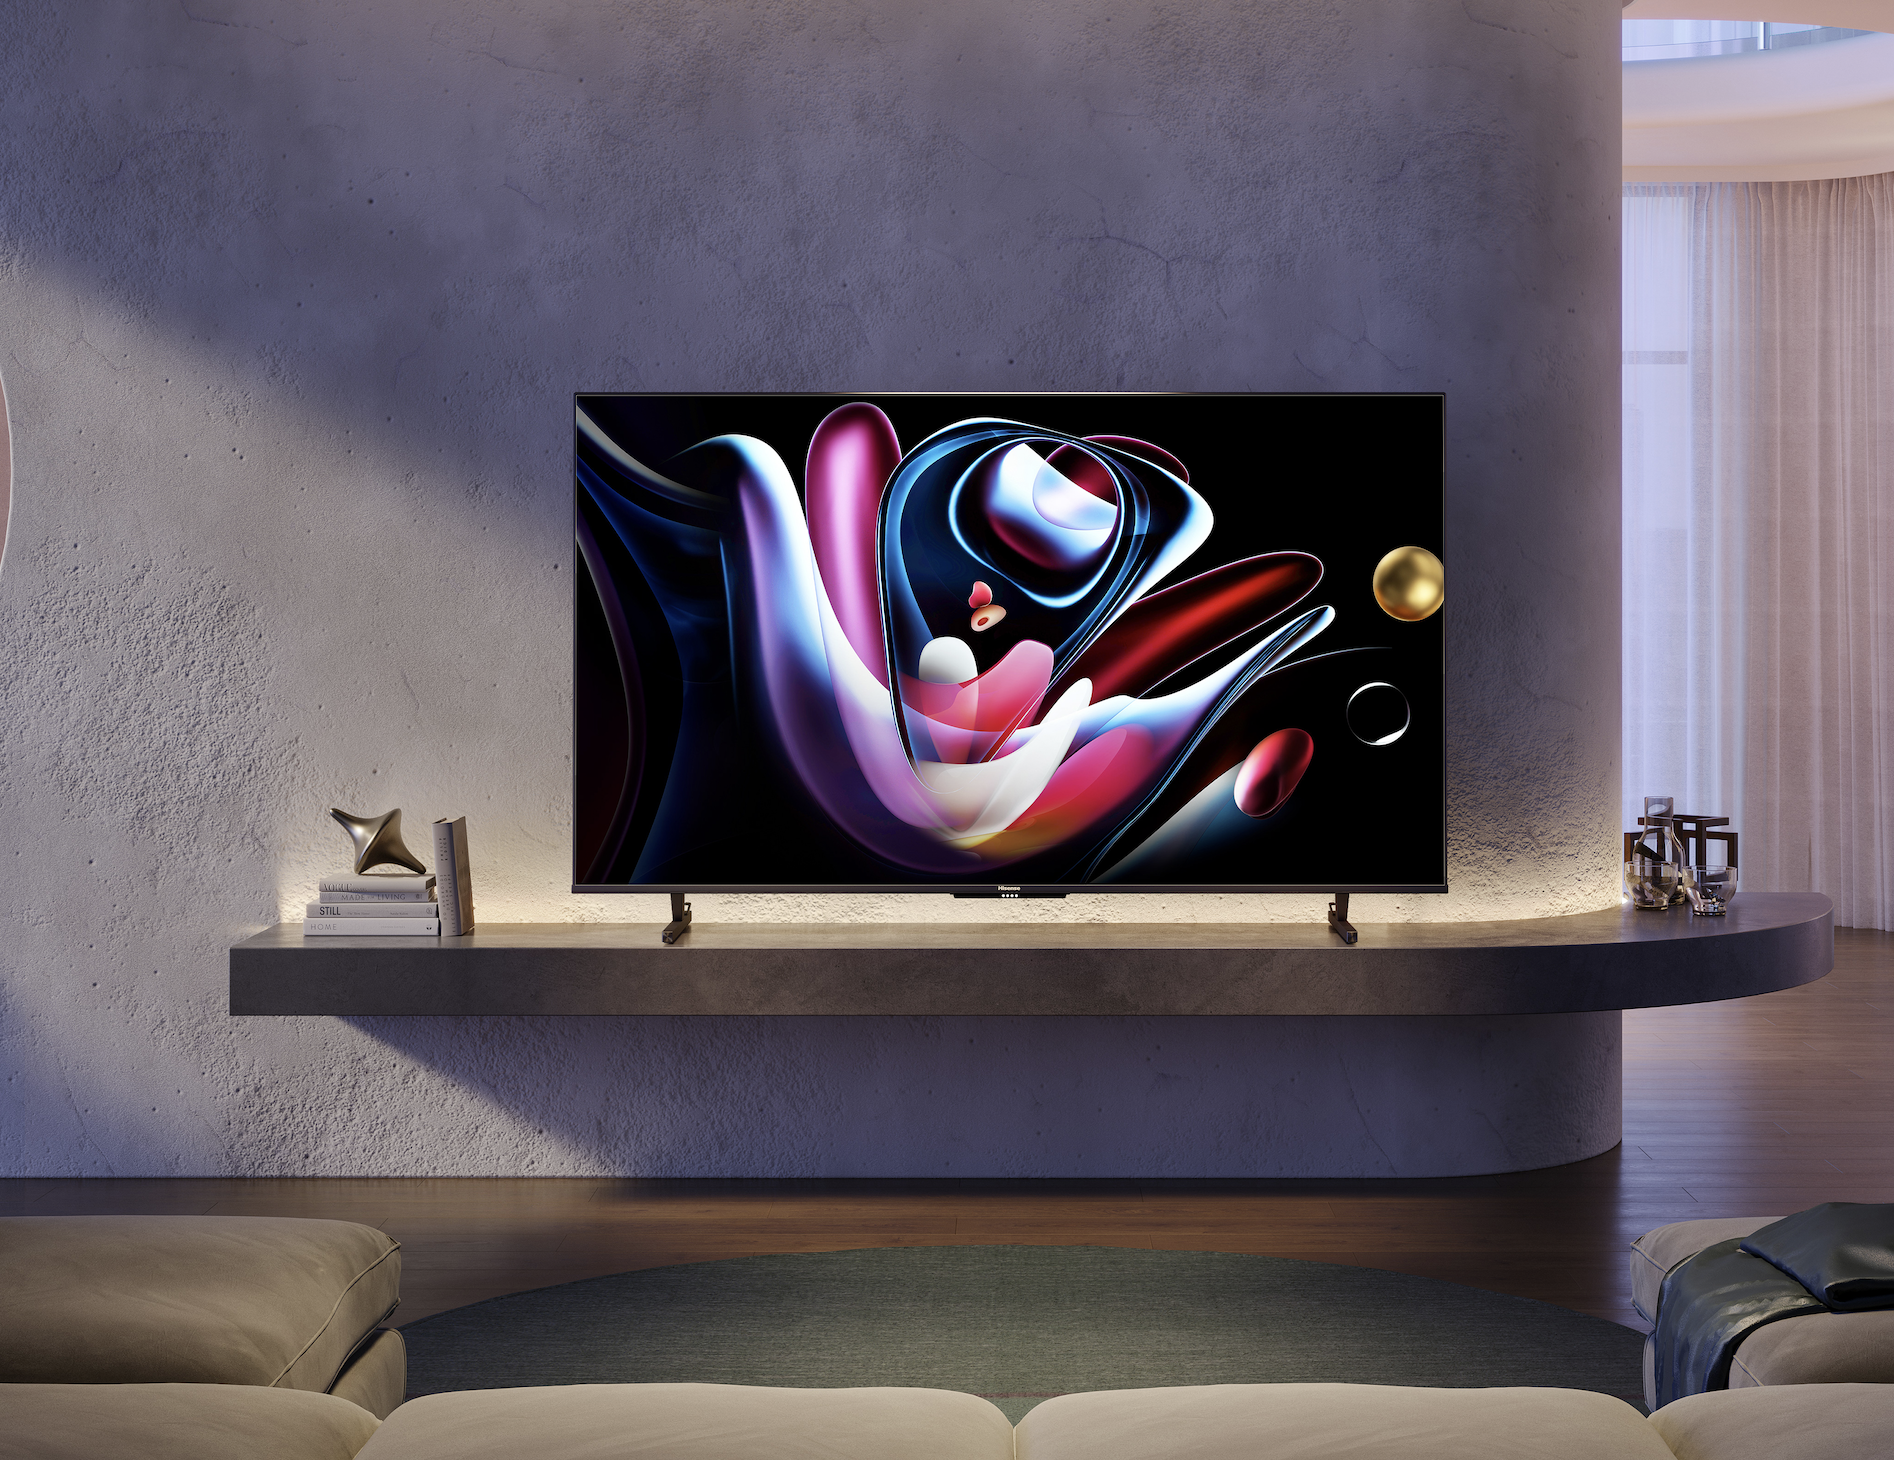 Hisense U8K Review: Blissful Balance of TV Picture Quality, Size and Price  - CNET